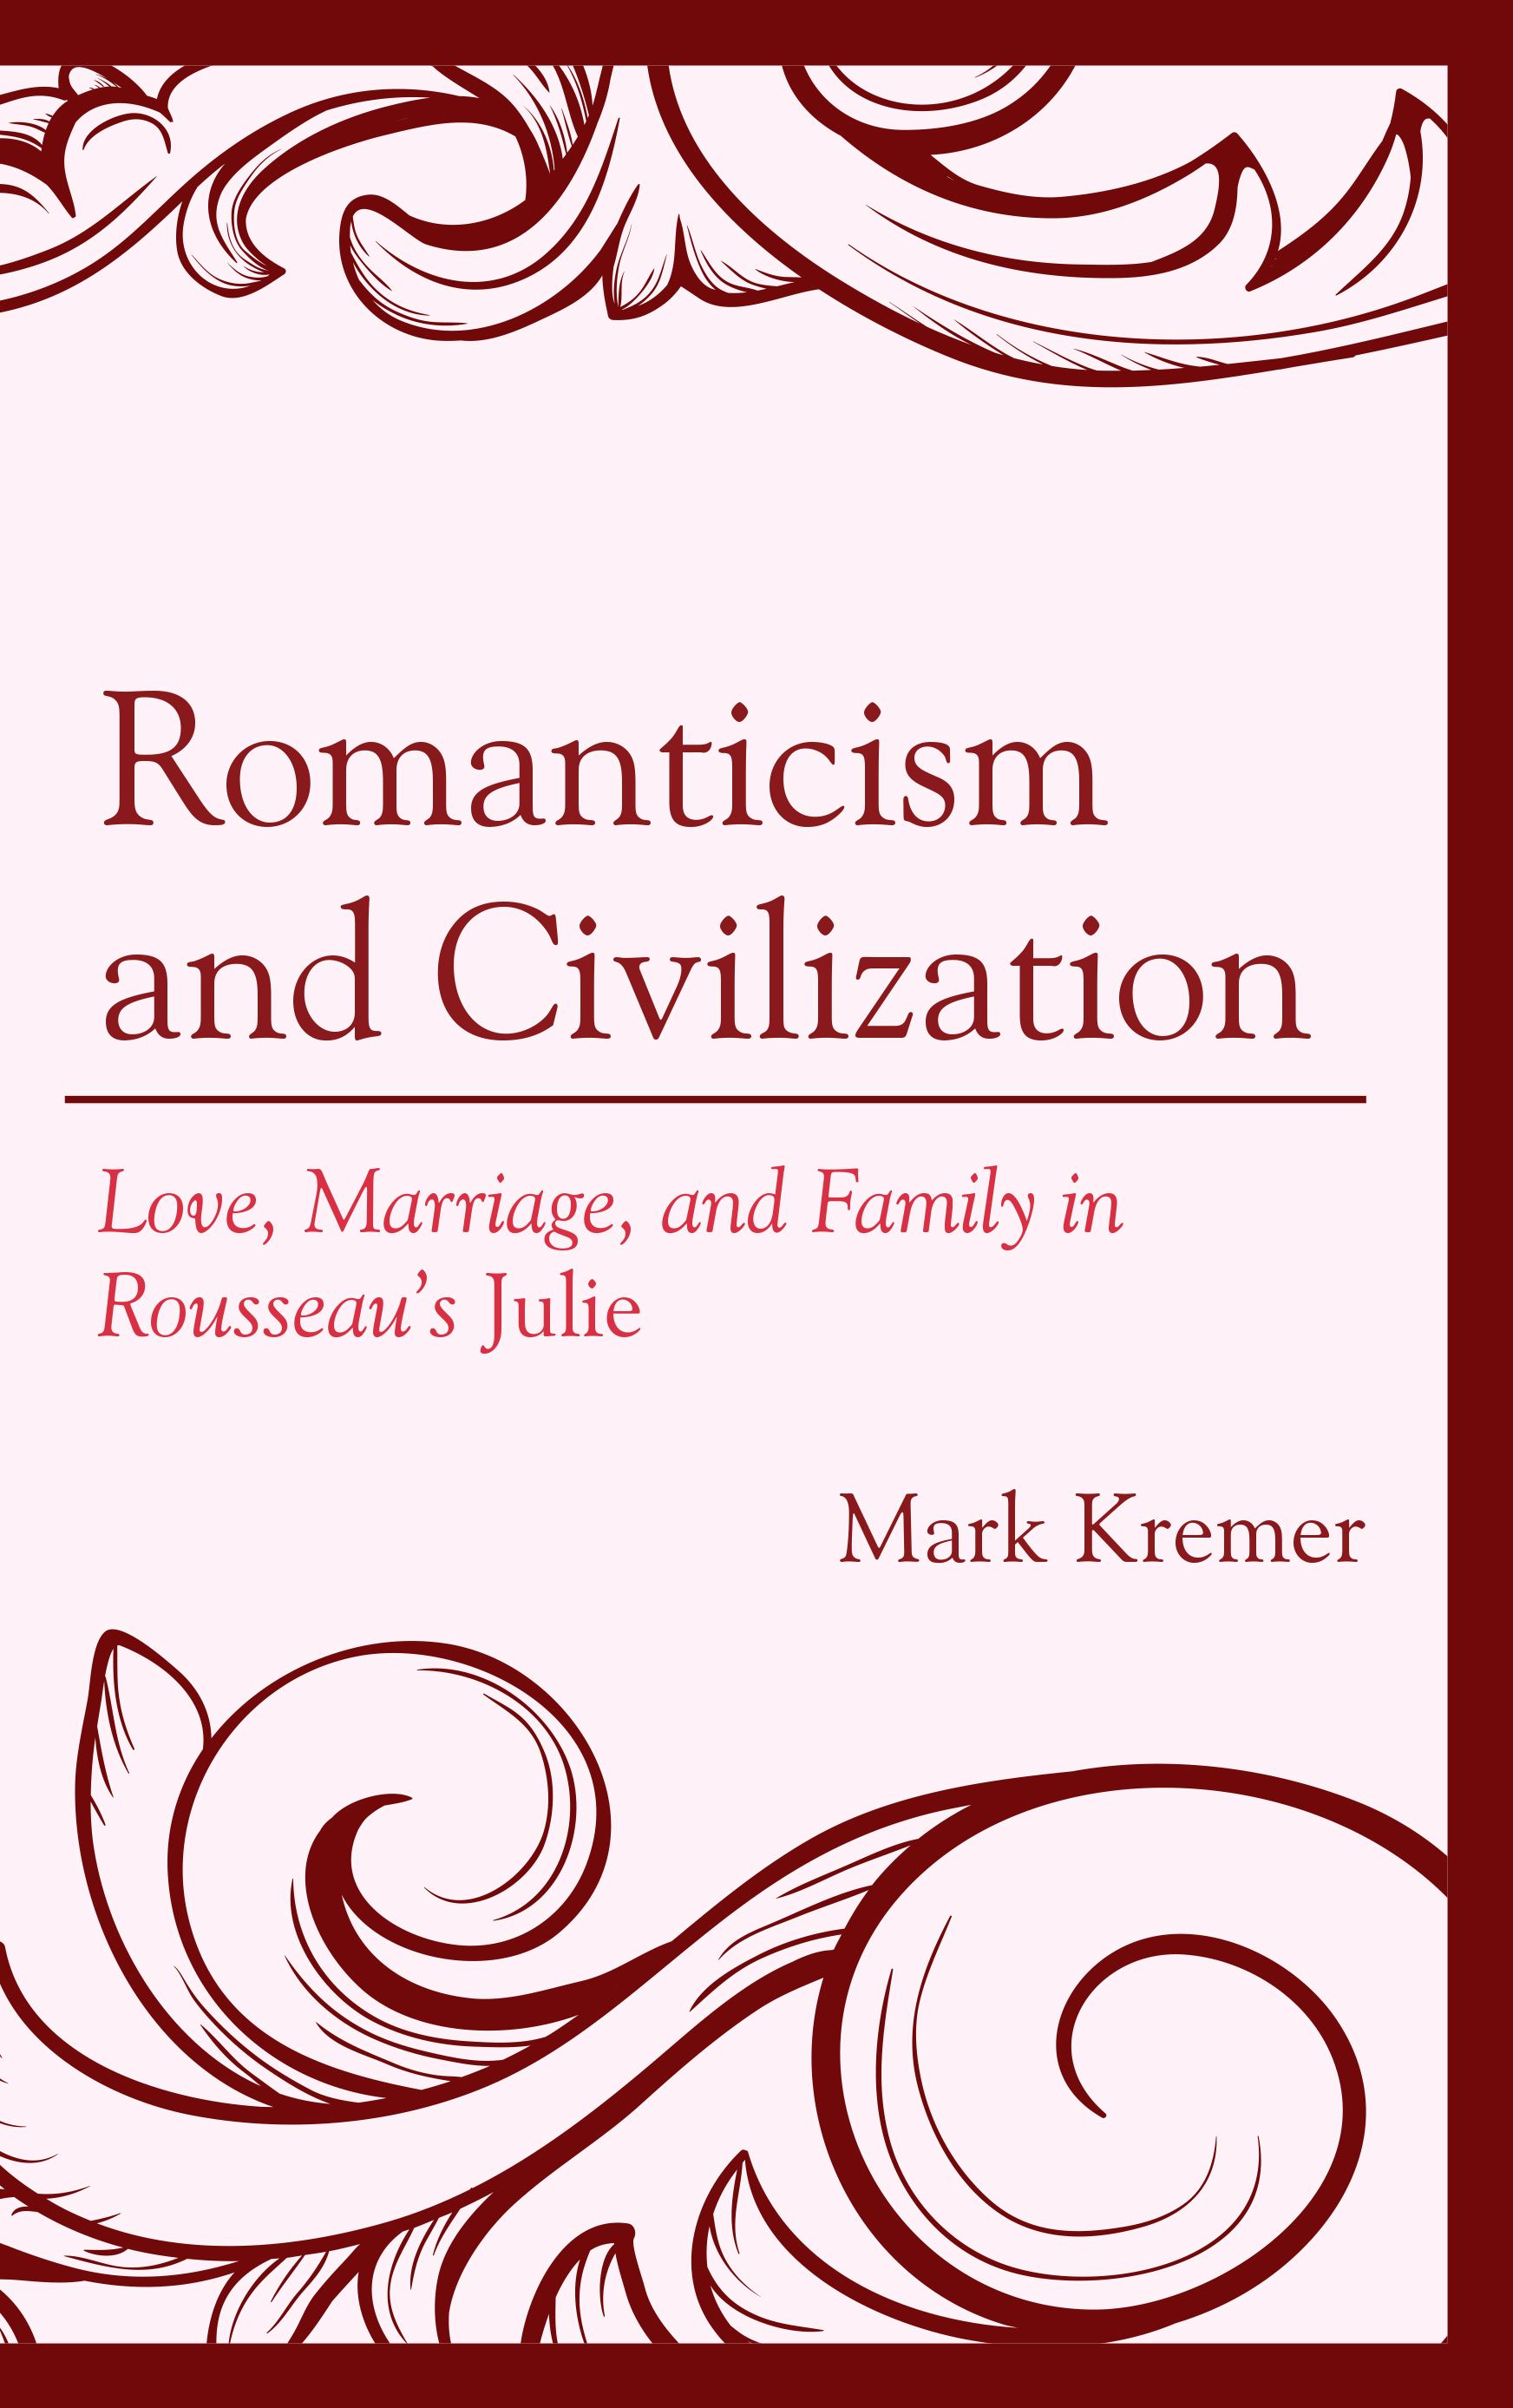 Romanticism and Civilization: Love, Marriage, and Family in Rousseau’s Julie